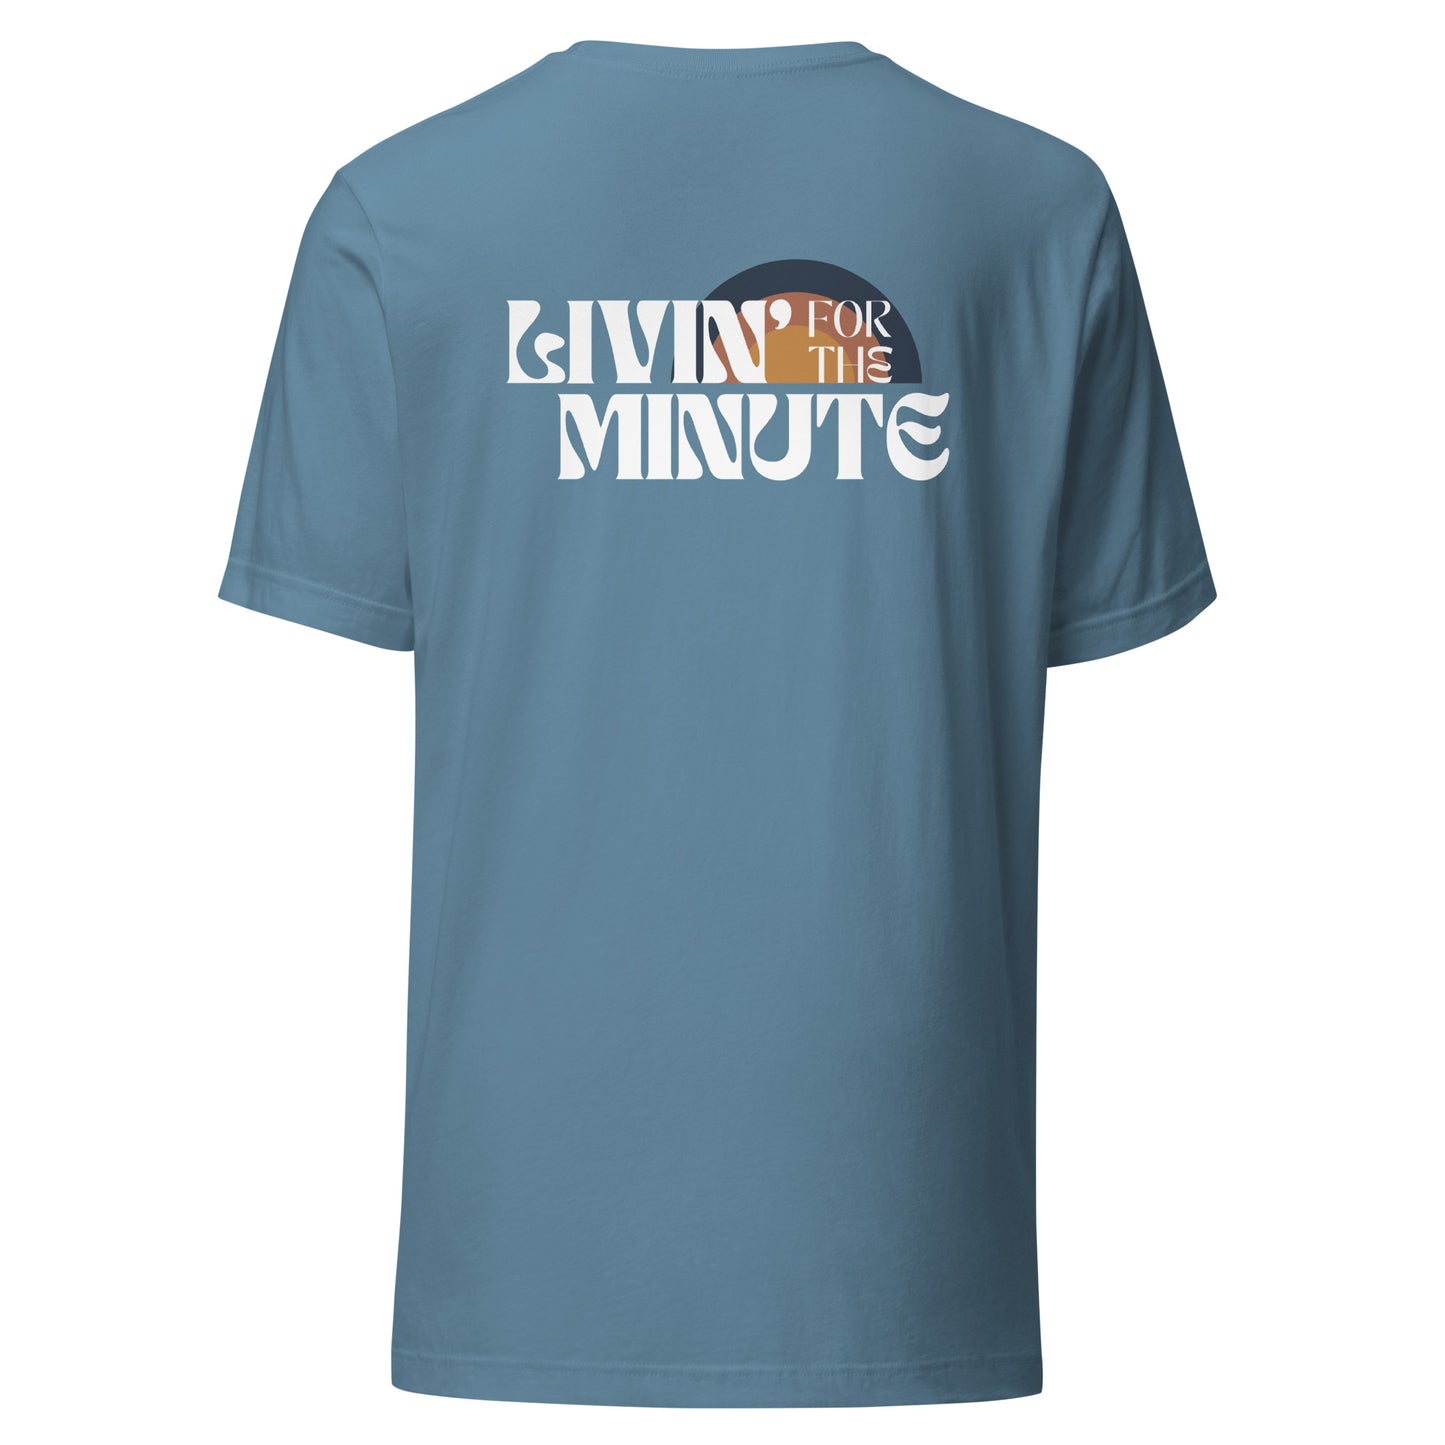 Livin' For The Minute T-shirt